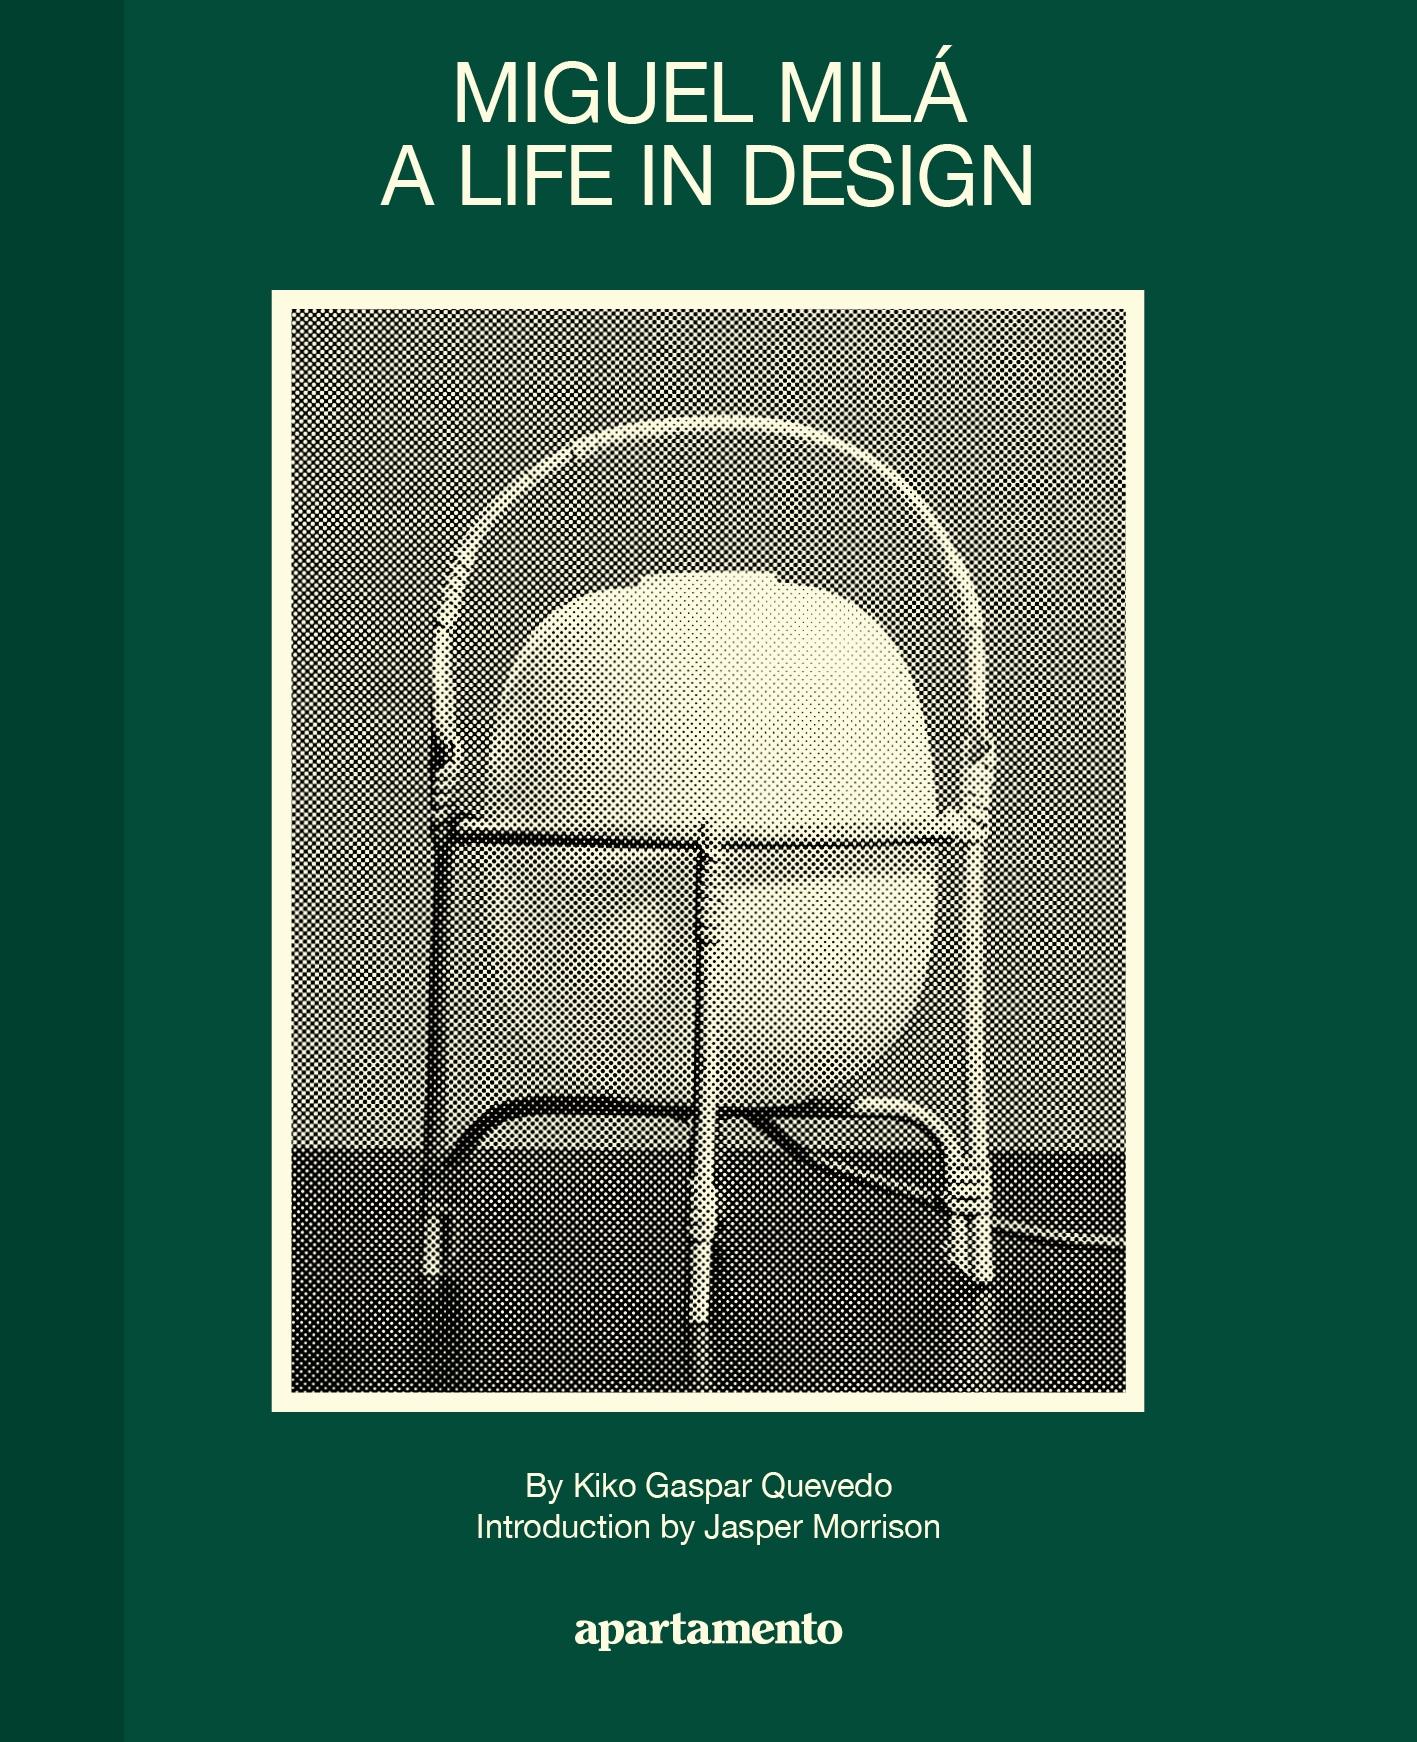 MIGUEL MILA. A LIFE IN DESIGN